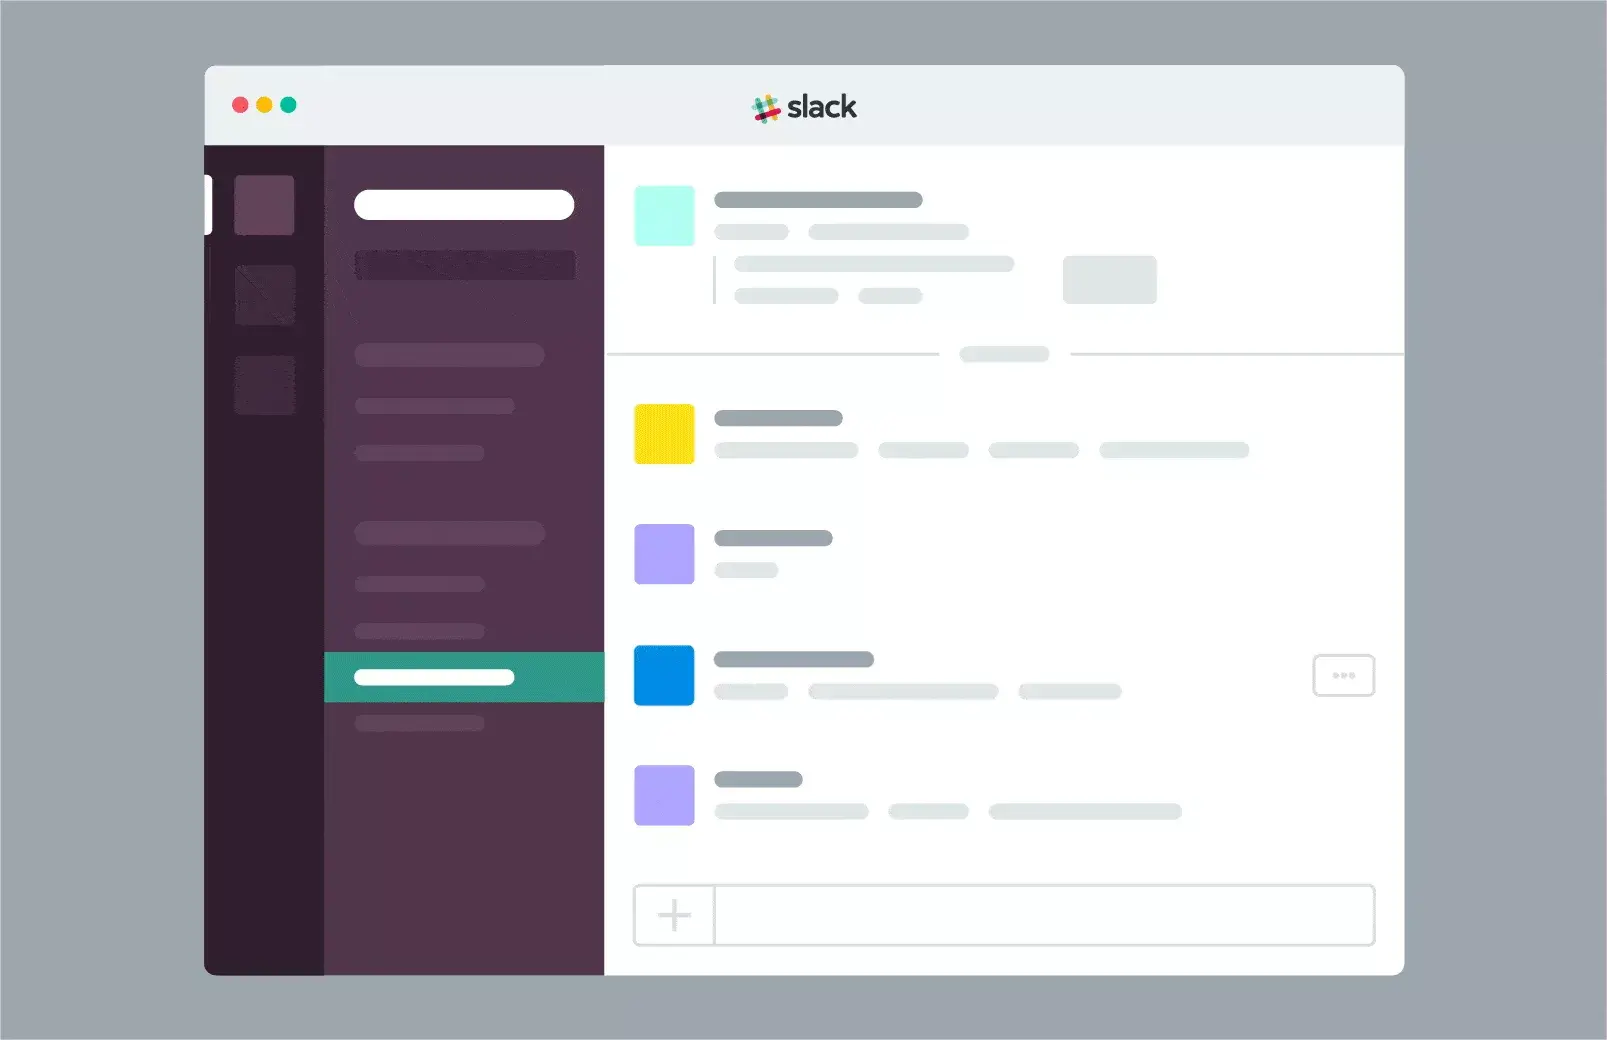 Turn messages into action with the new Asana for Slack